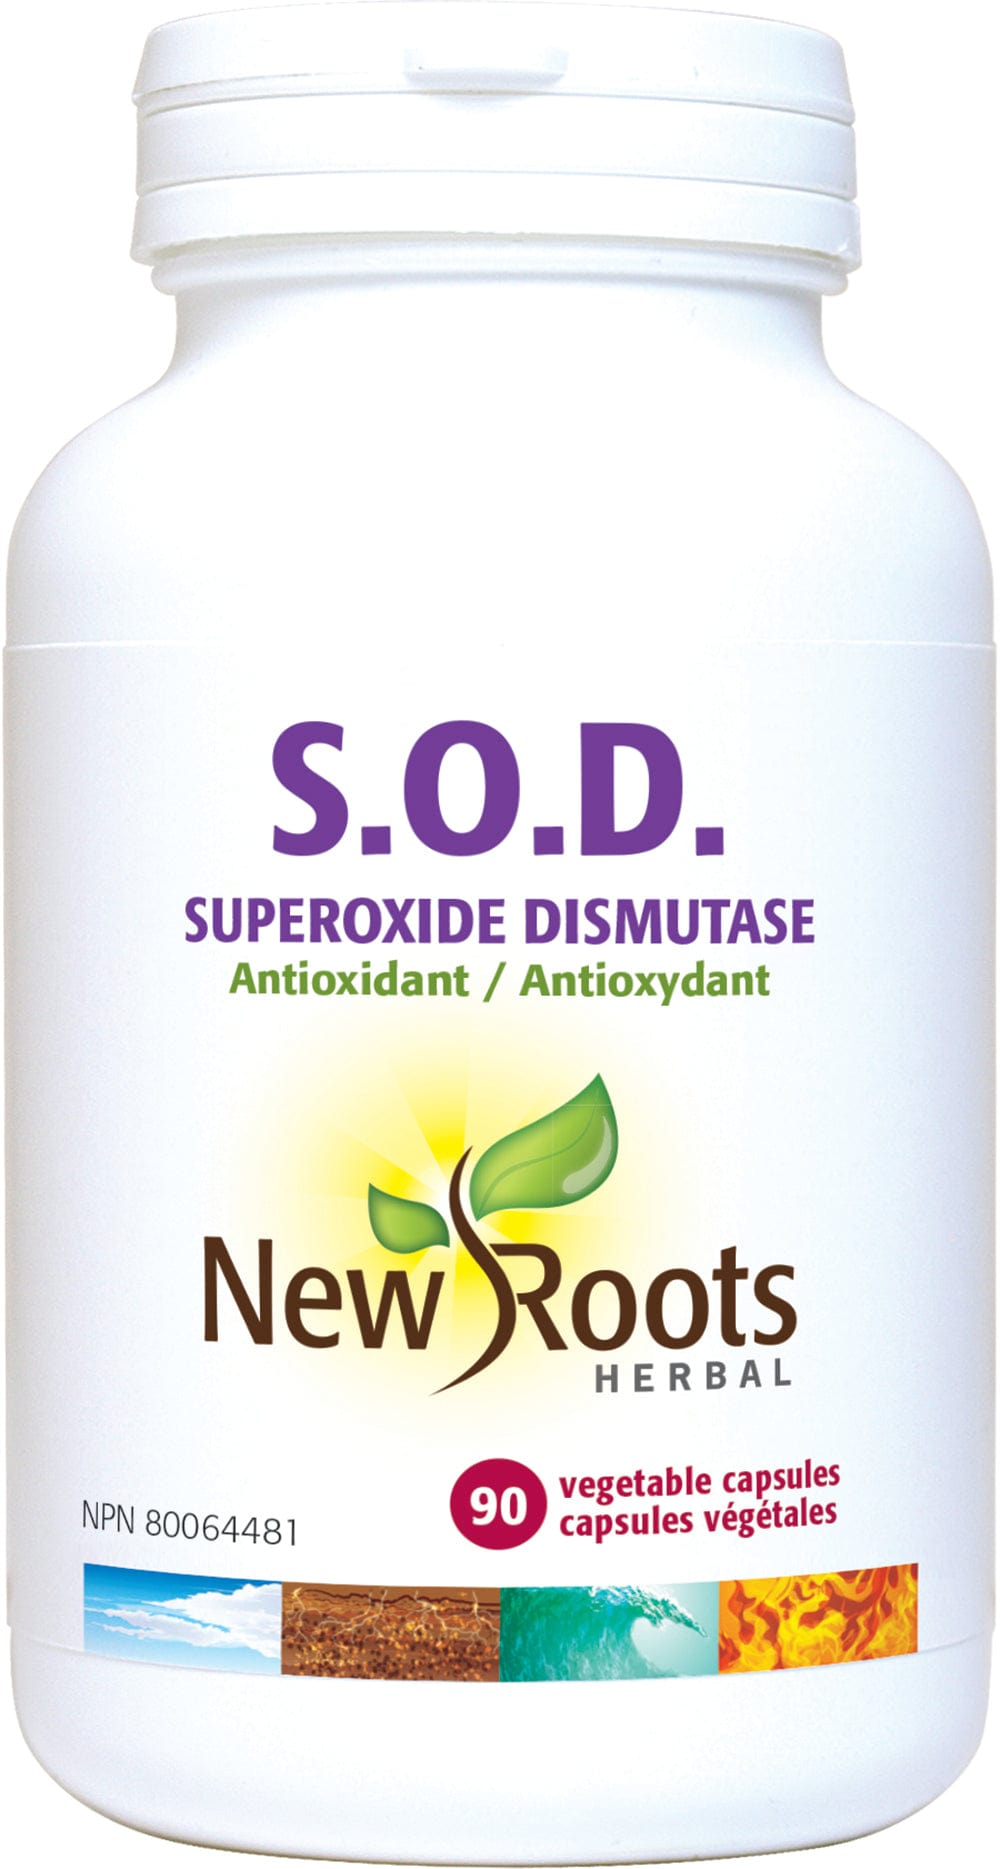 NEW ROOTS HERBAL Suppléments S.O.D. (formule antioxydante) 90vcaps